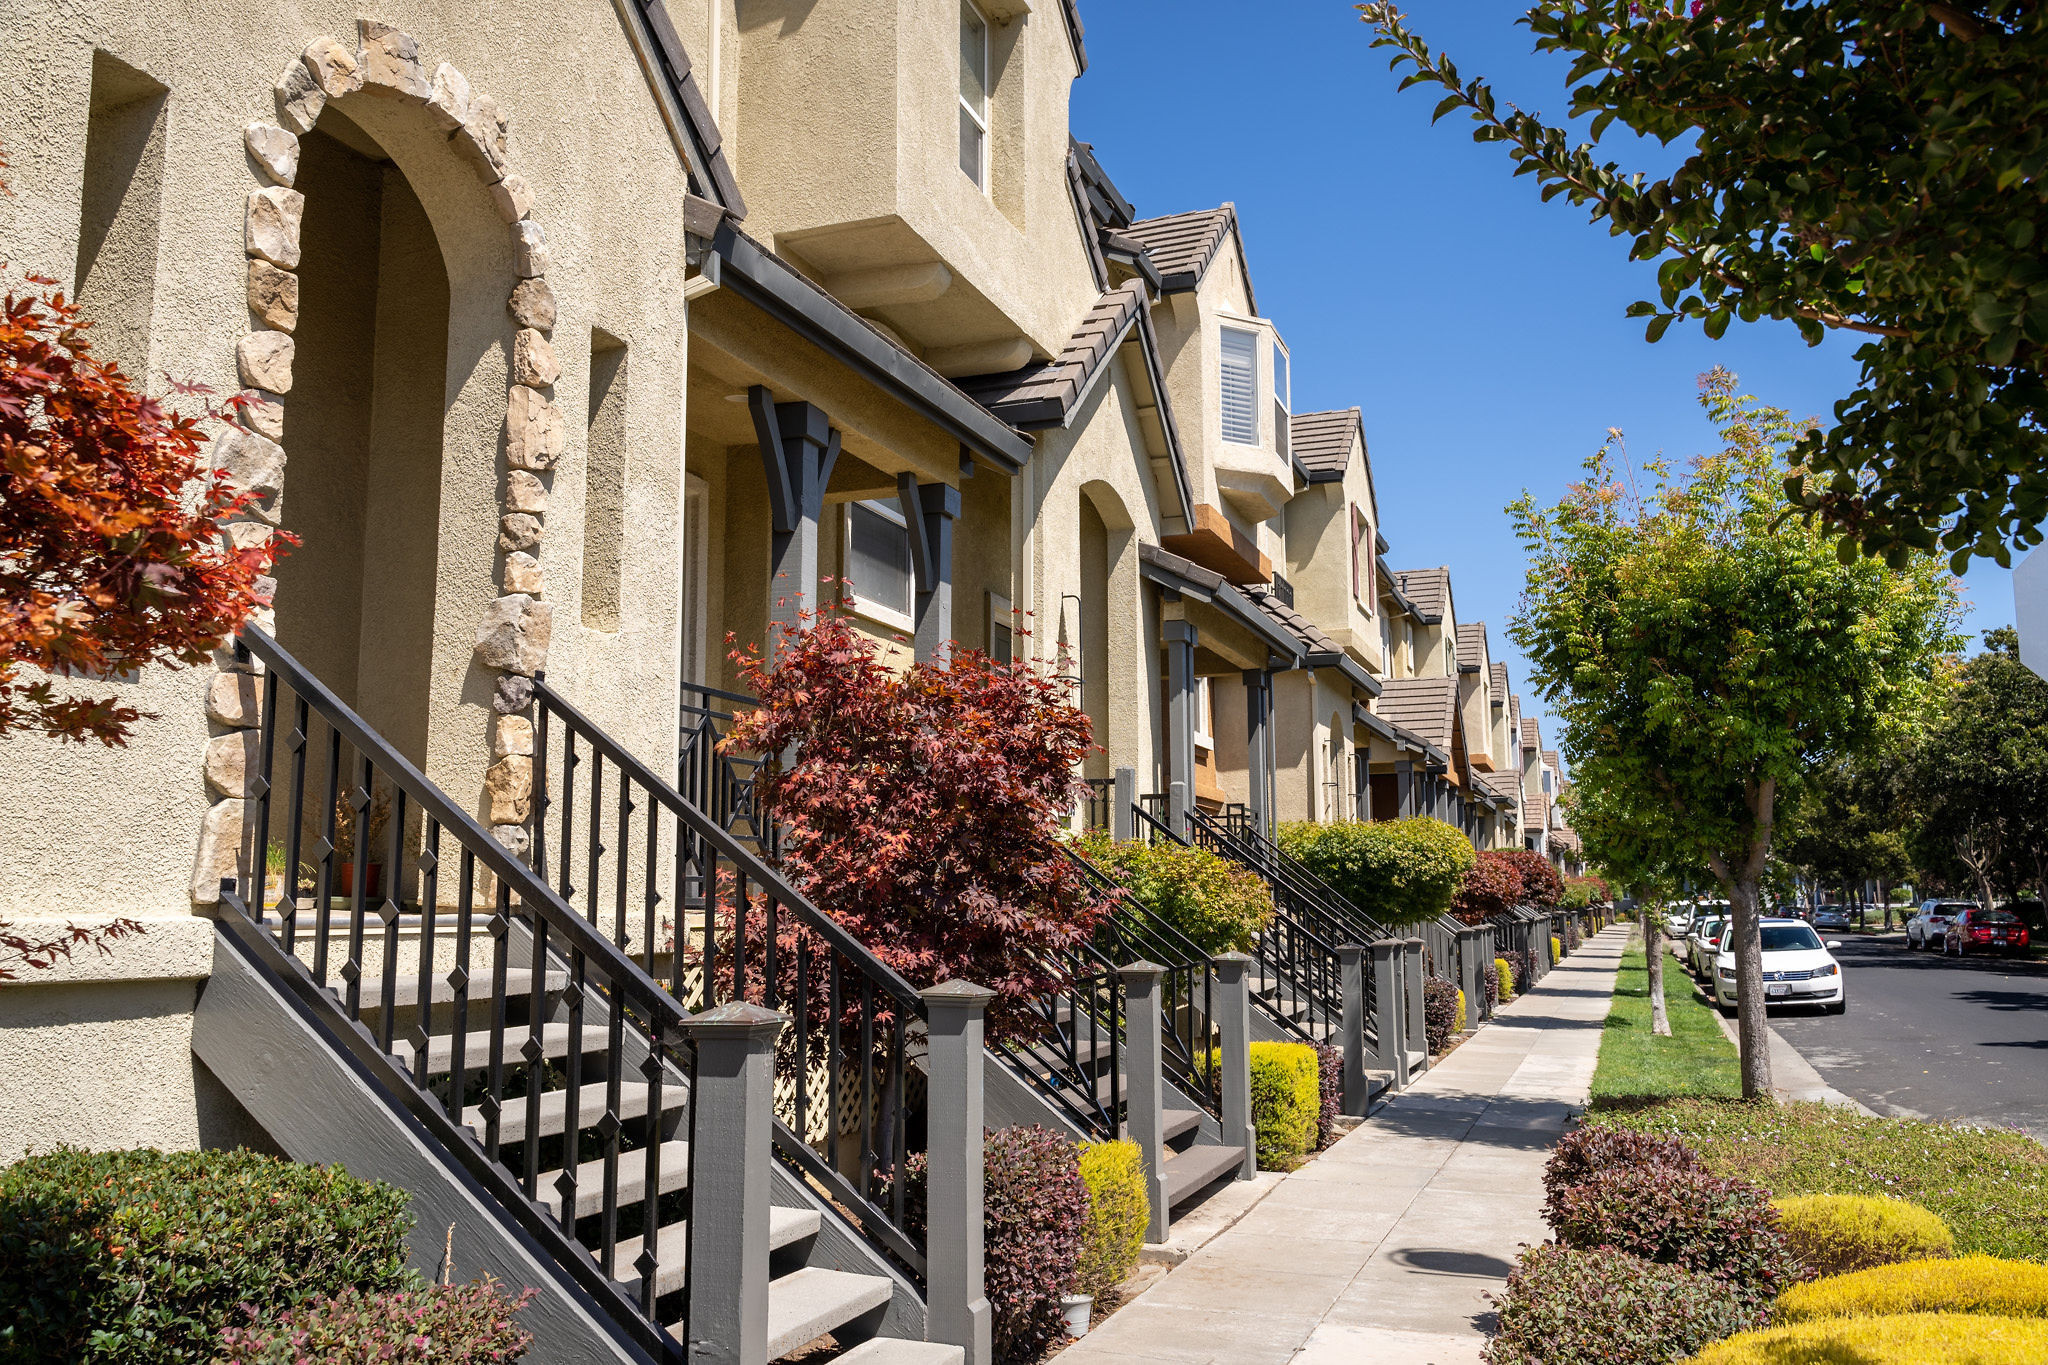 Bay Meadows/Fiesta Gardens townhomes with identical grayish steps and iron hand rails in San Mateo.